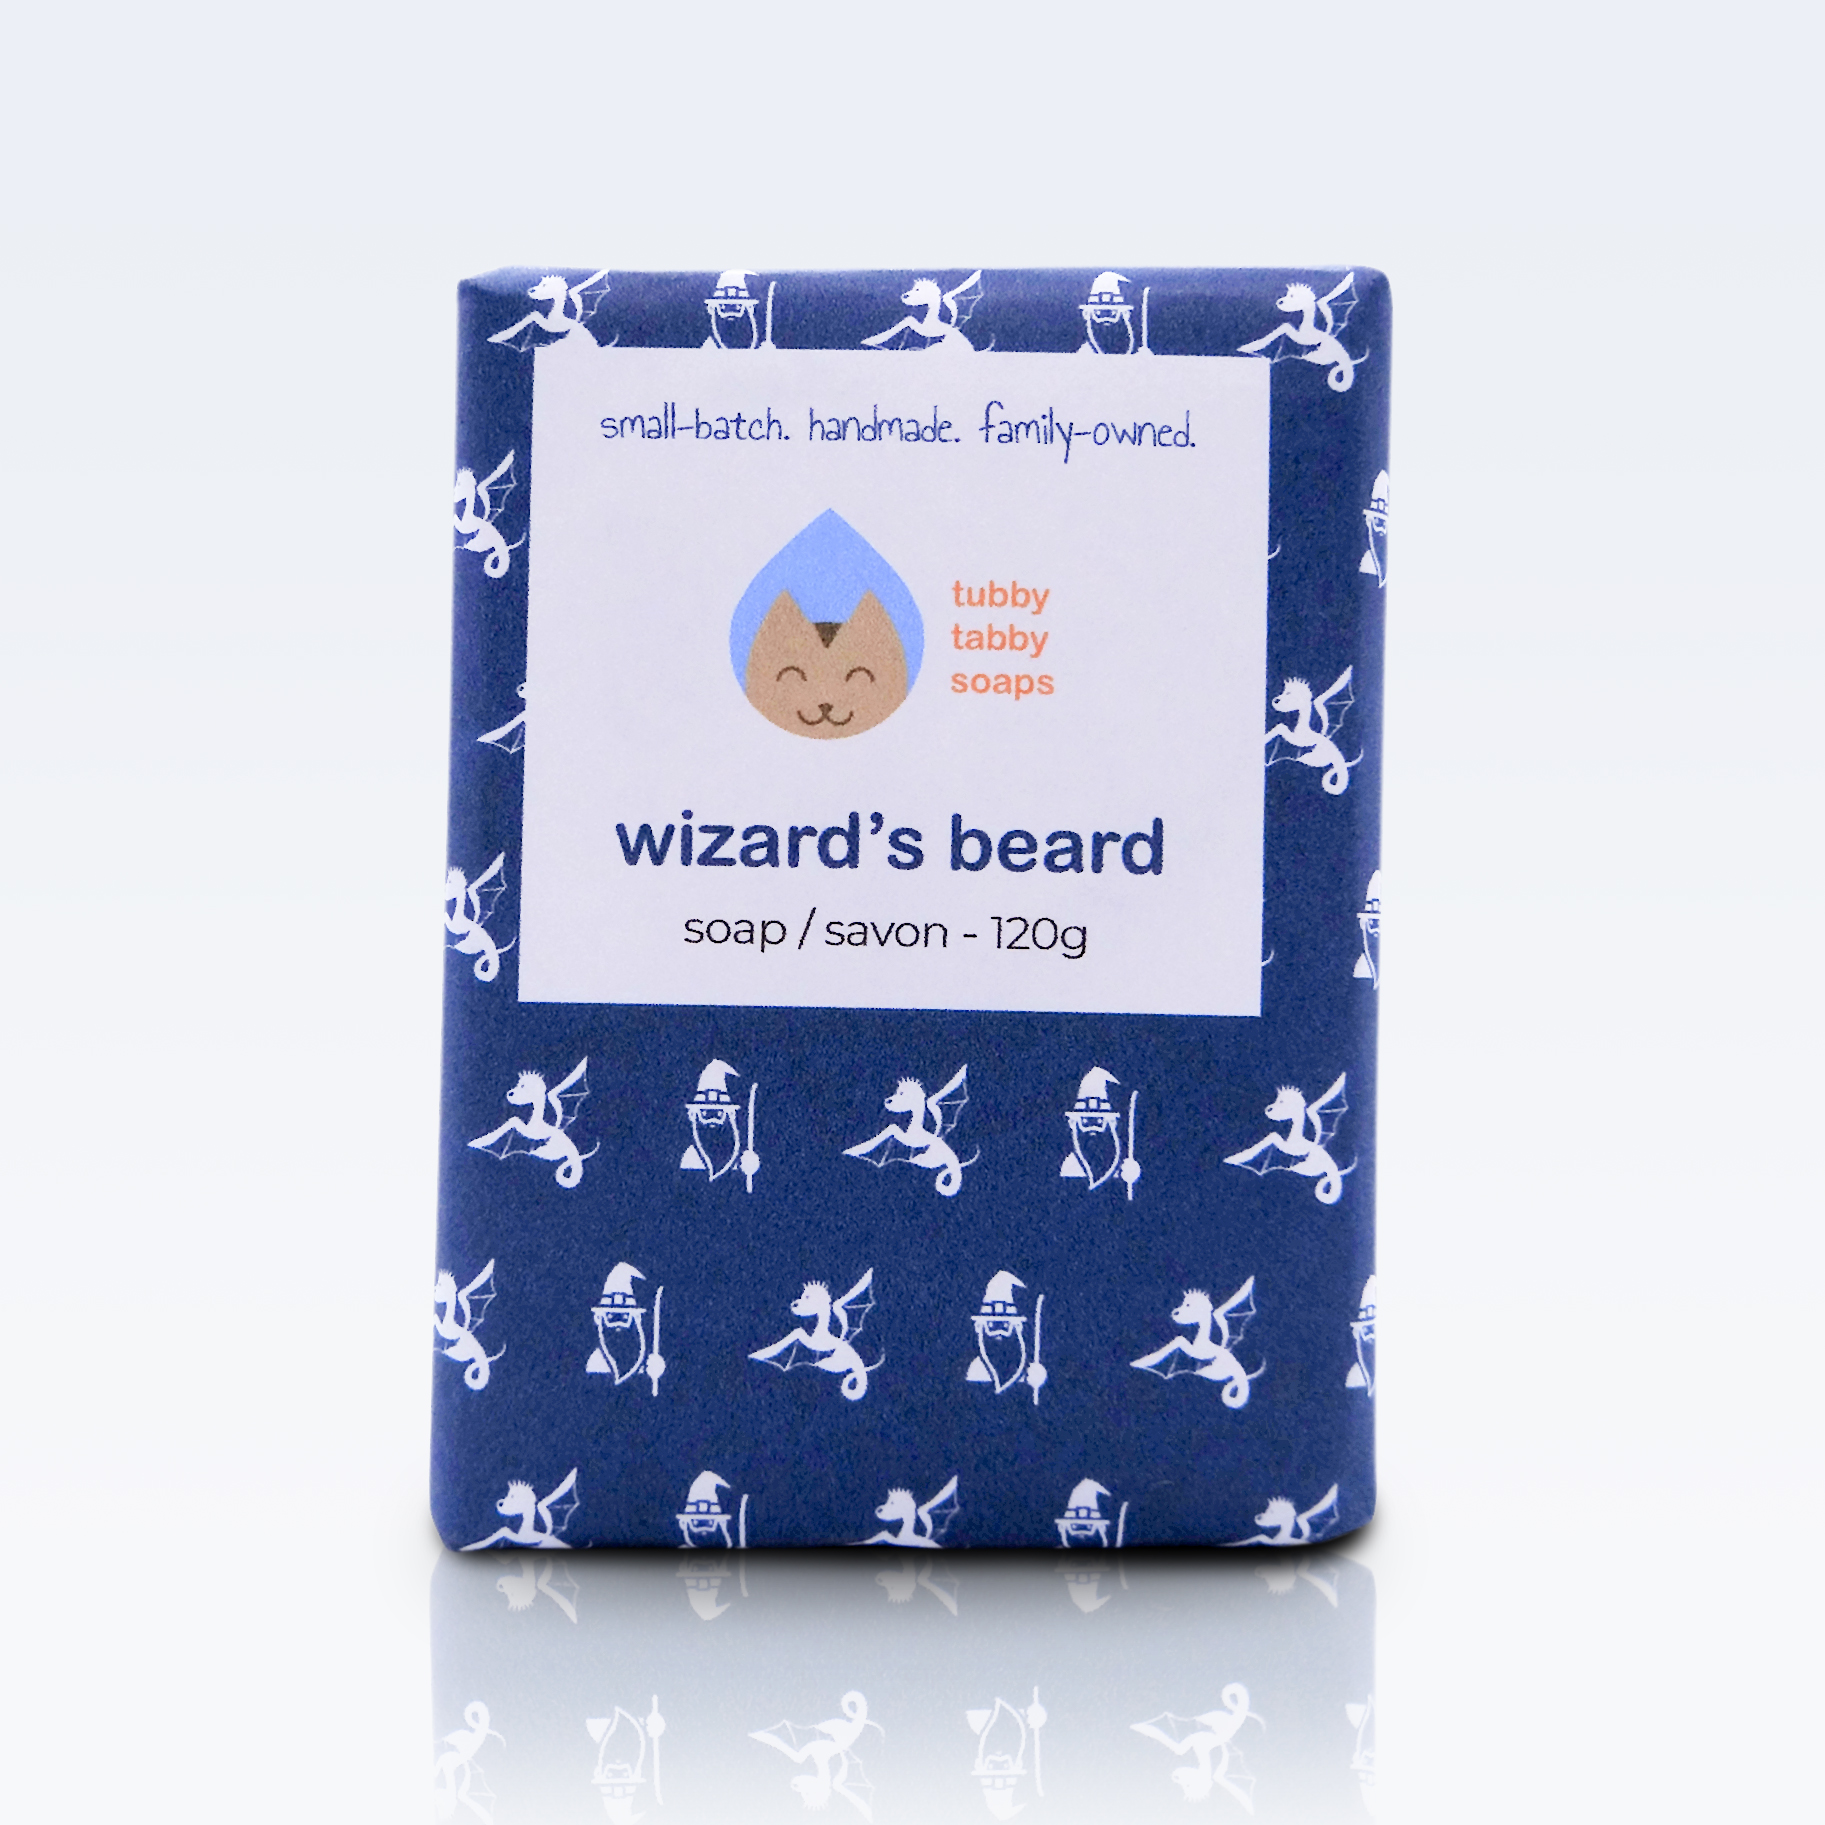 Wizard's Beard handmade bar soap by Tubby Tabby Soaps (inspired by Gandalf from Lord of the Rings)